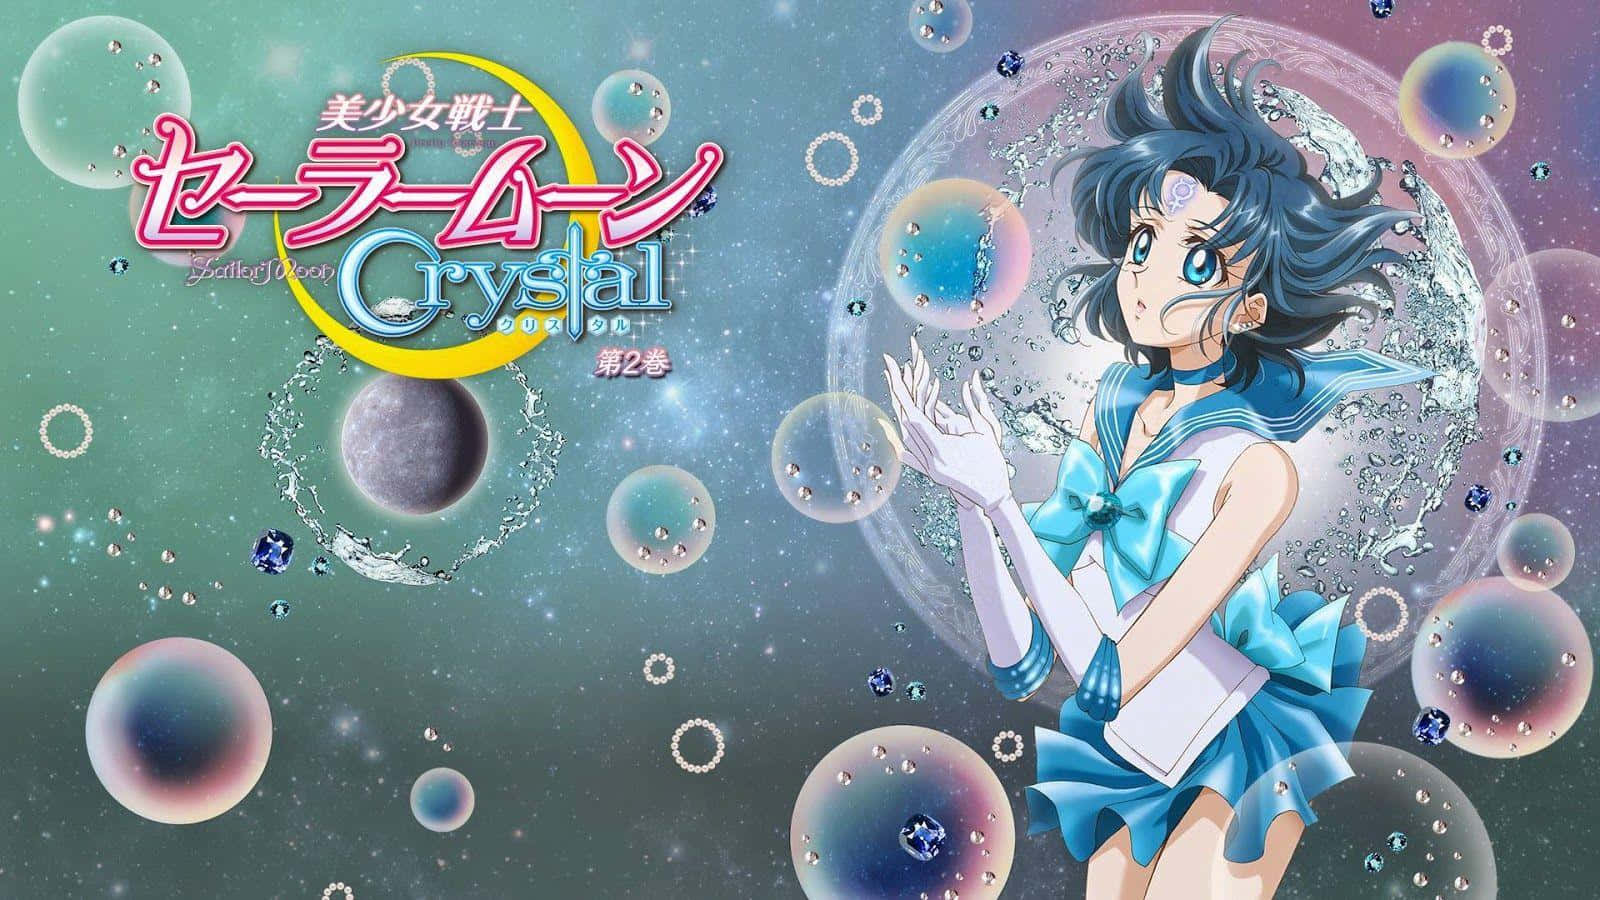 "The courageous Sailor Moon Crystal team unite to save the world" Wallpaper